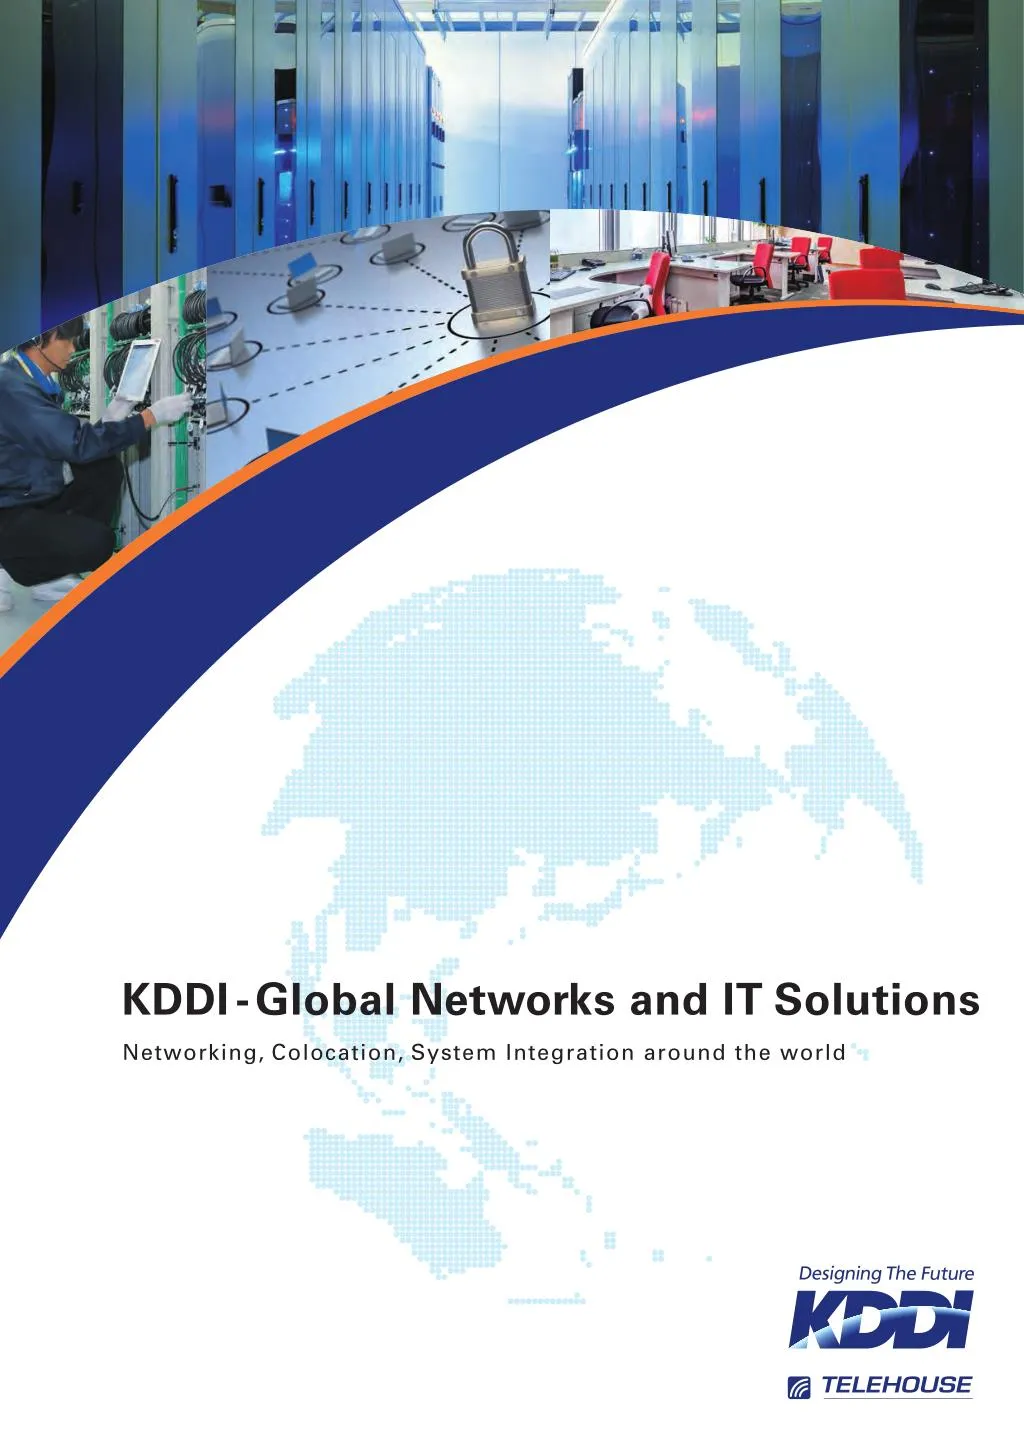 kddi global networks and it solutions